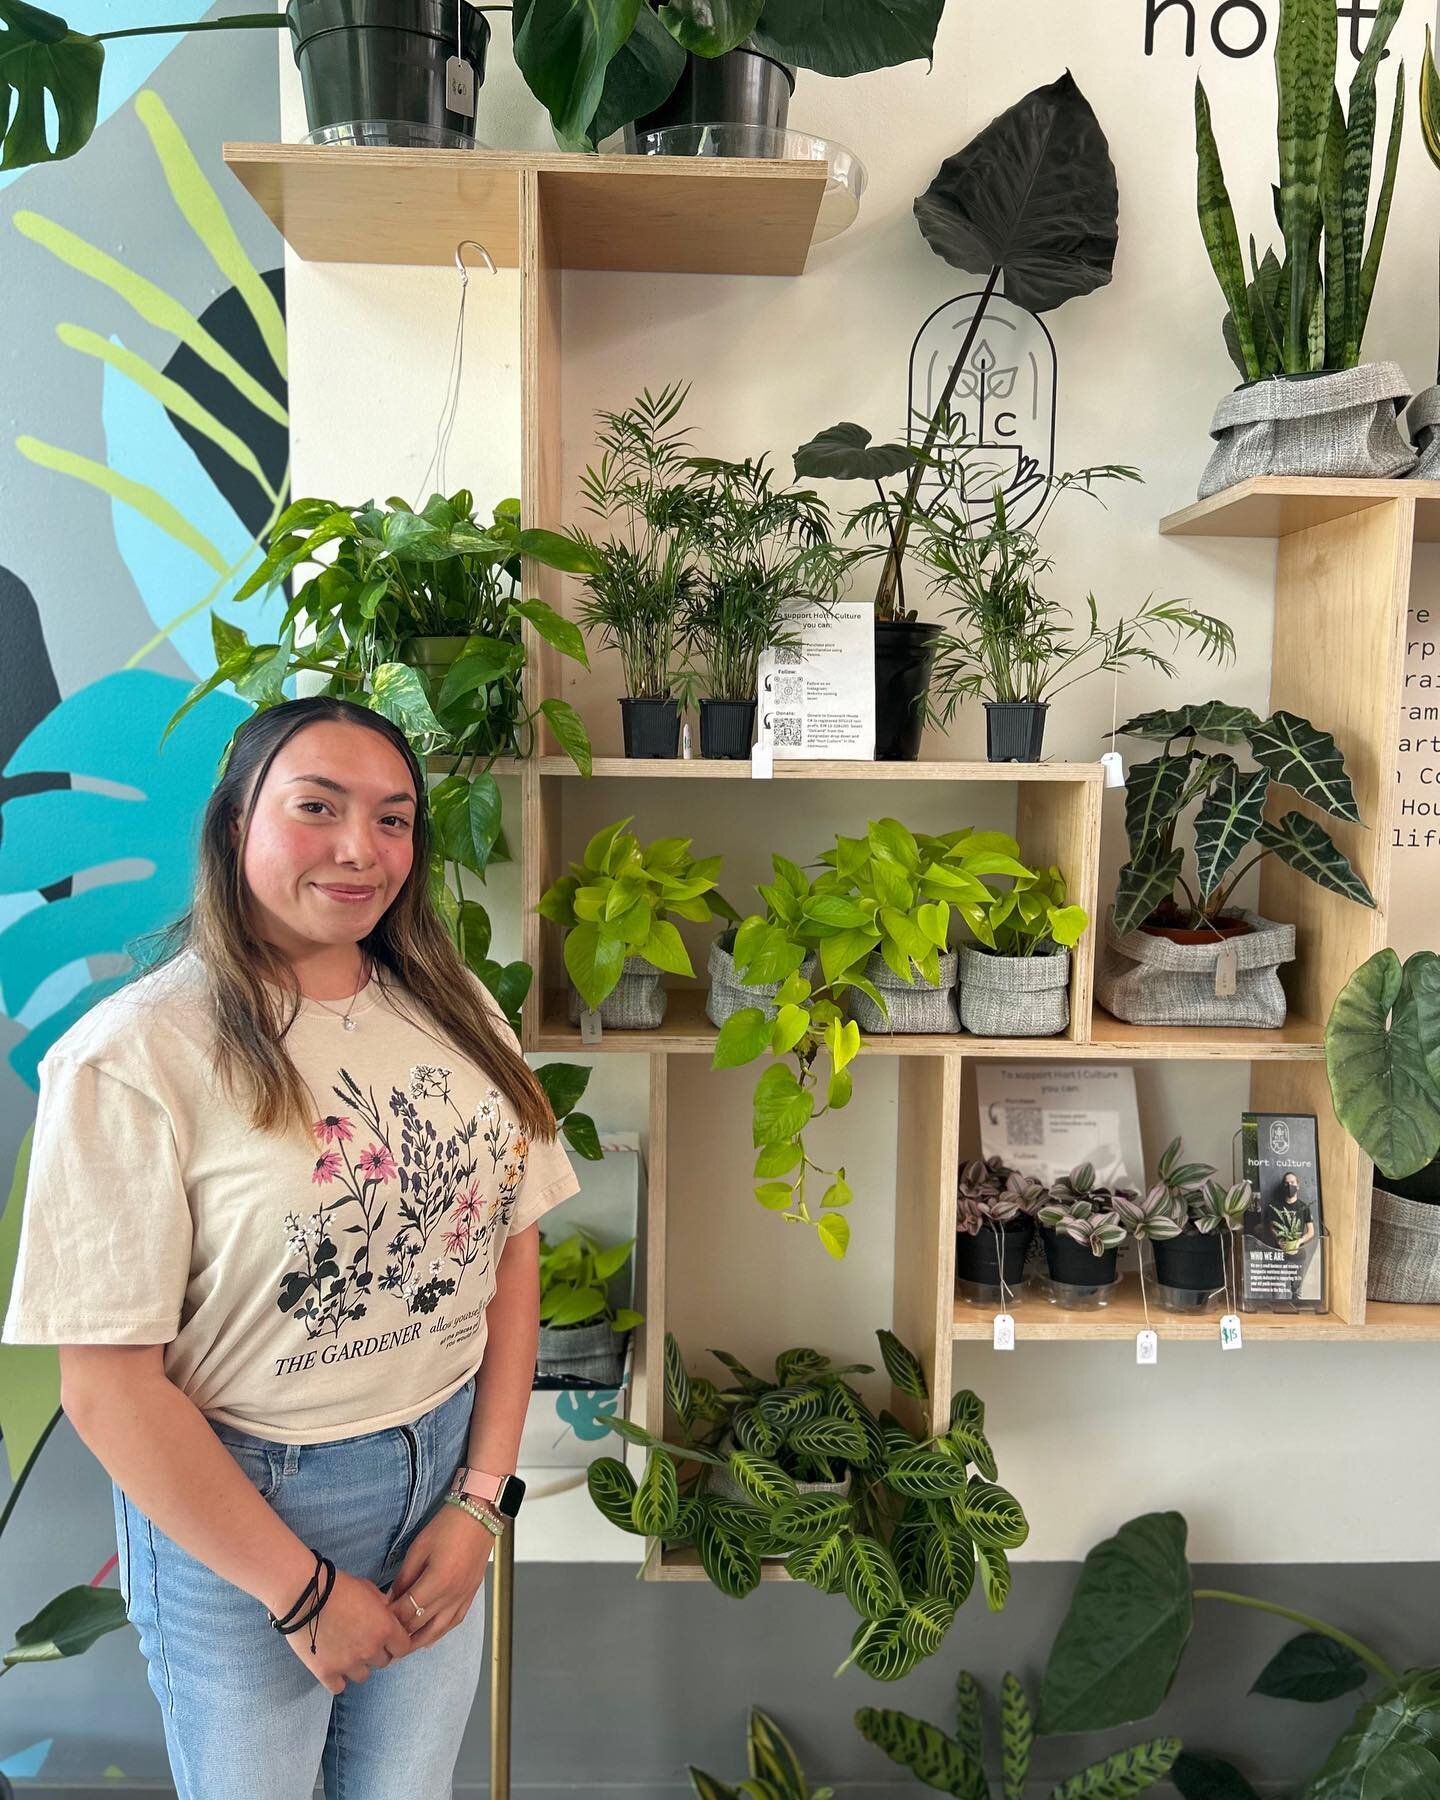 Welcome to our newest Gardener on the block! 🪴💟💚🪴💕
.
.
.
#hortculture #plantsmakepeoplehappy #gardening #gardenlife #gardener #bayarea #bayareaplants #bayareaplantpeople